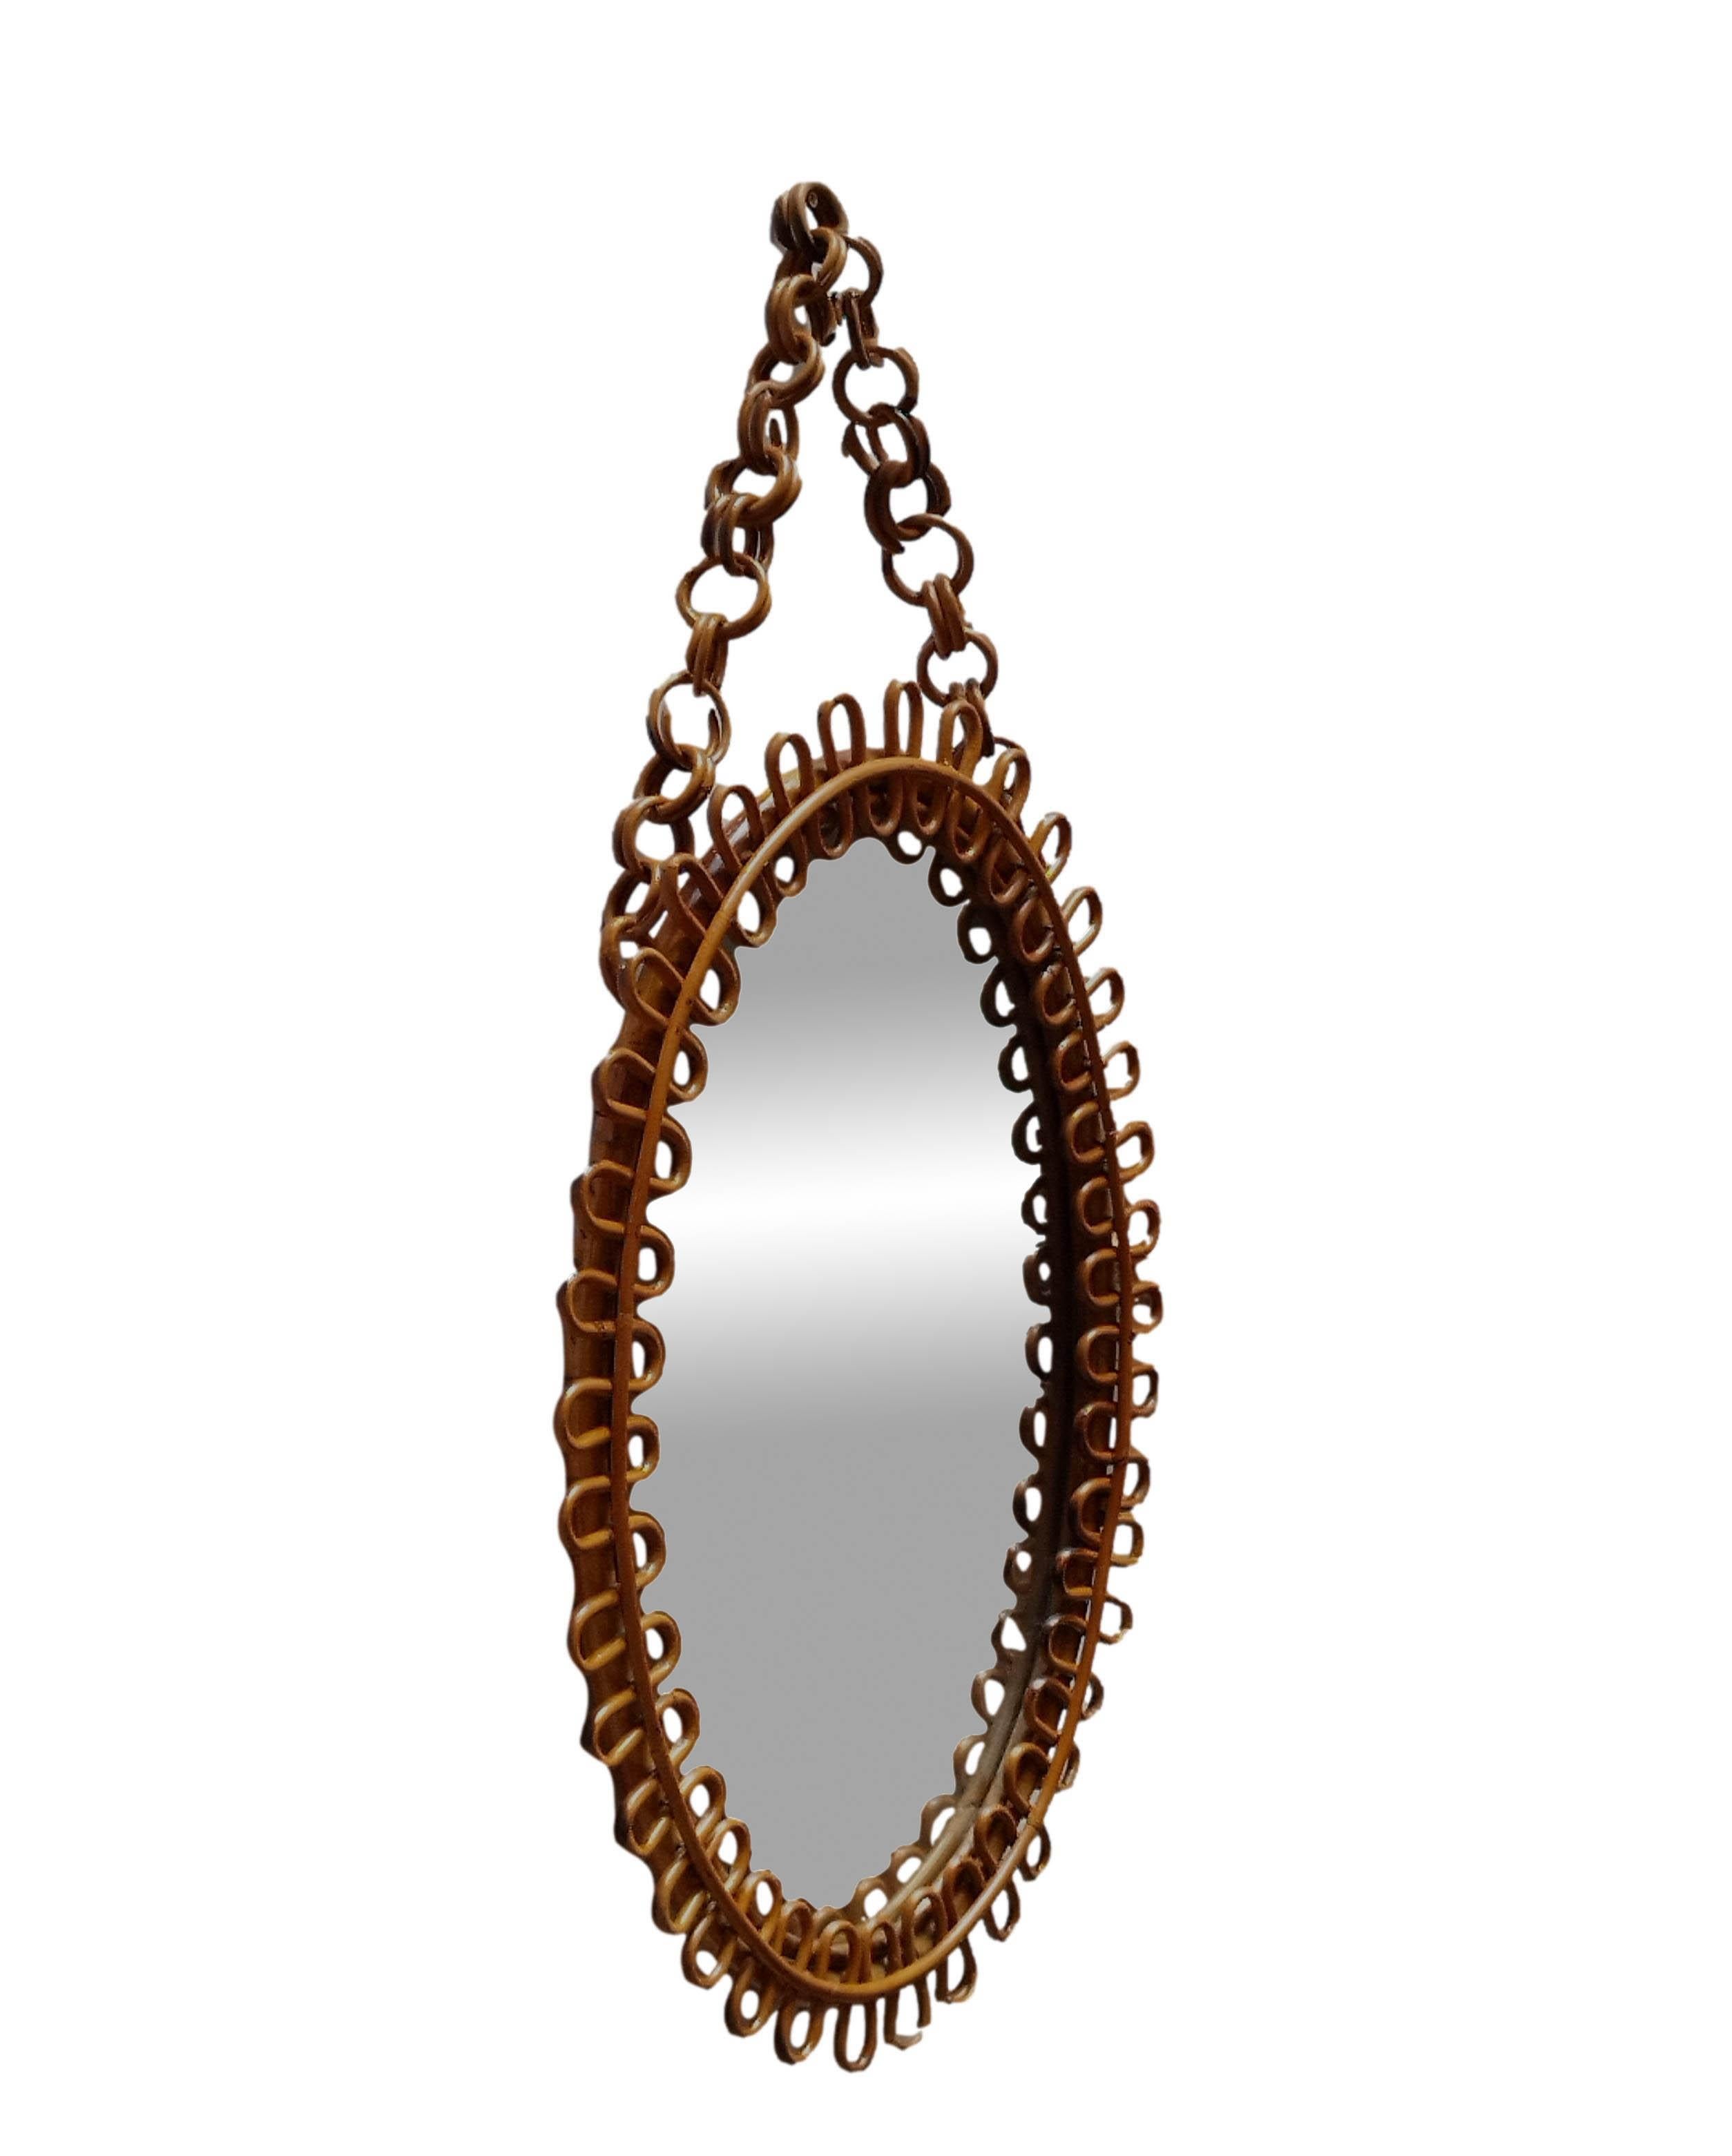 The mirror consists of an oval glass surrounded by an ingenious frame formed by two turns of bamboo joined by a dense weave of prickly pear cane to rods arranged radially with respect to the fulcrum of the oval mirror.
Oval mirror made of bamboo